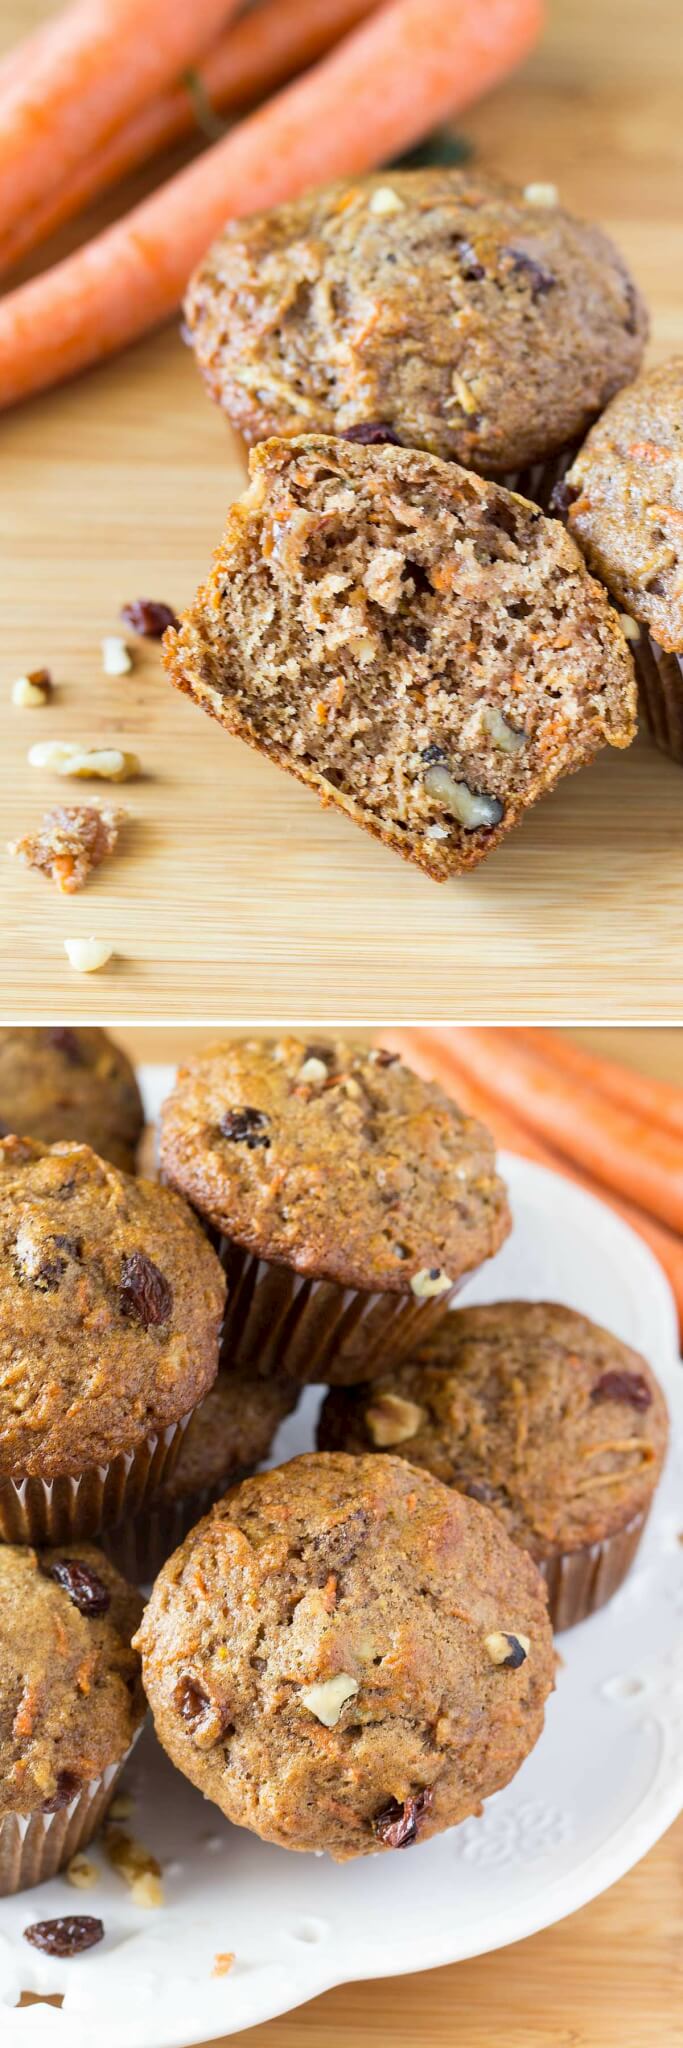 With shredded carrots, apple, cinnamon, orange zest, walnuts & raisins - these Morning Glory Muffins are packed with flavor and so easy to make.